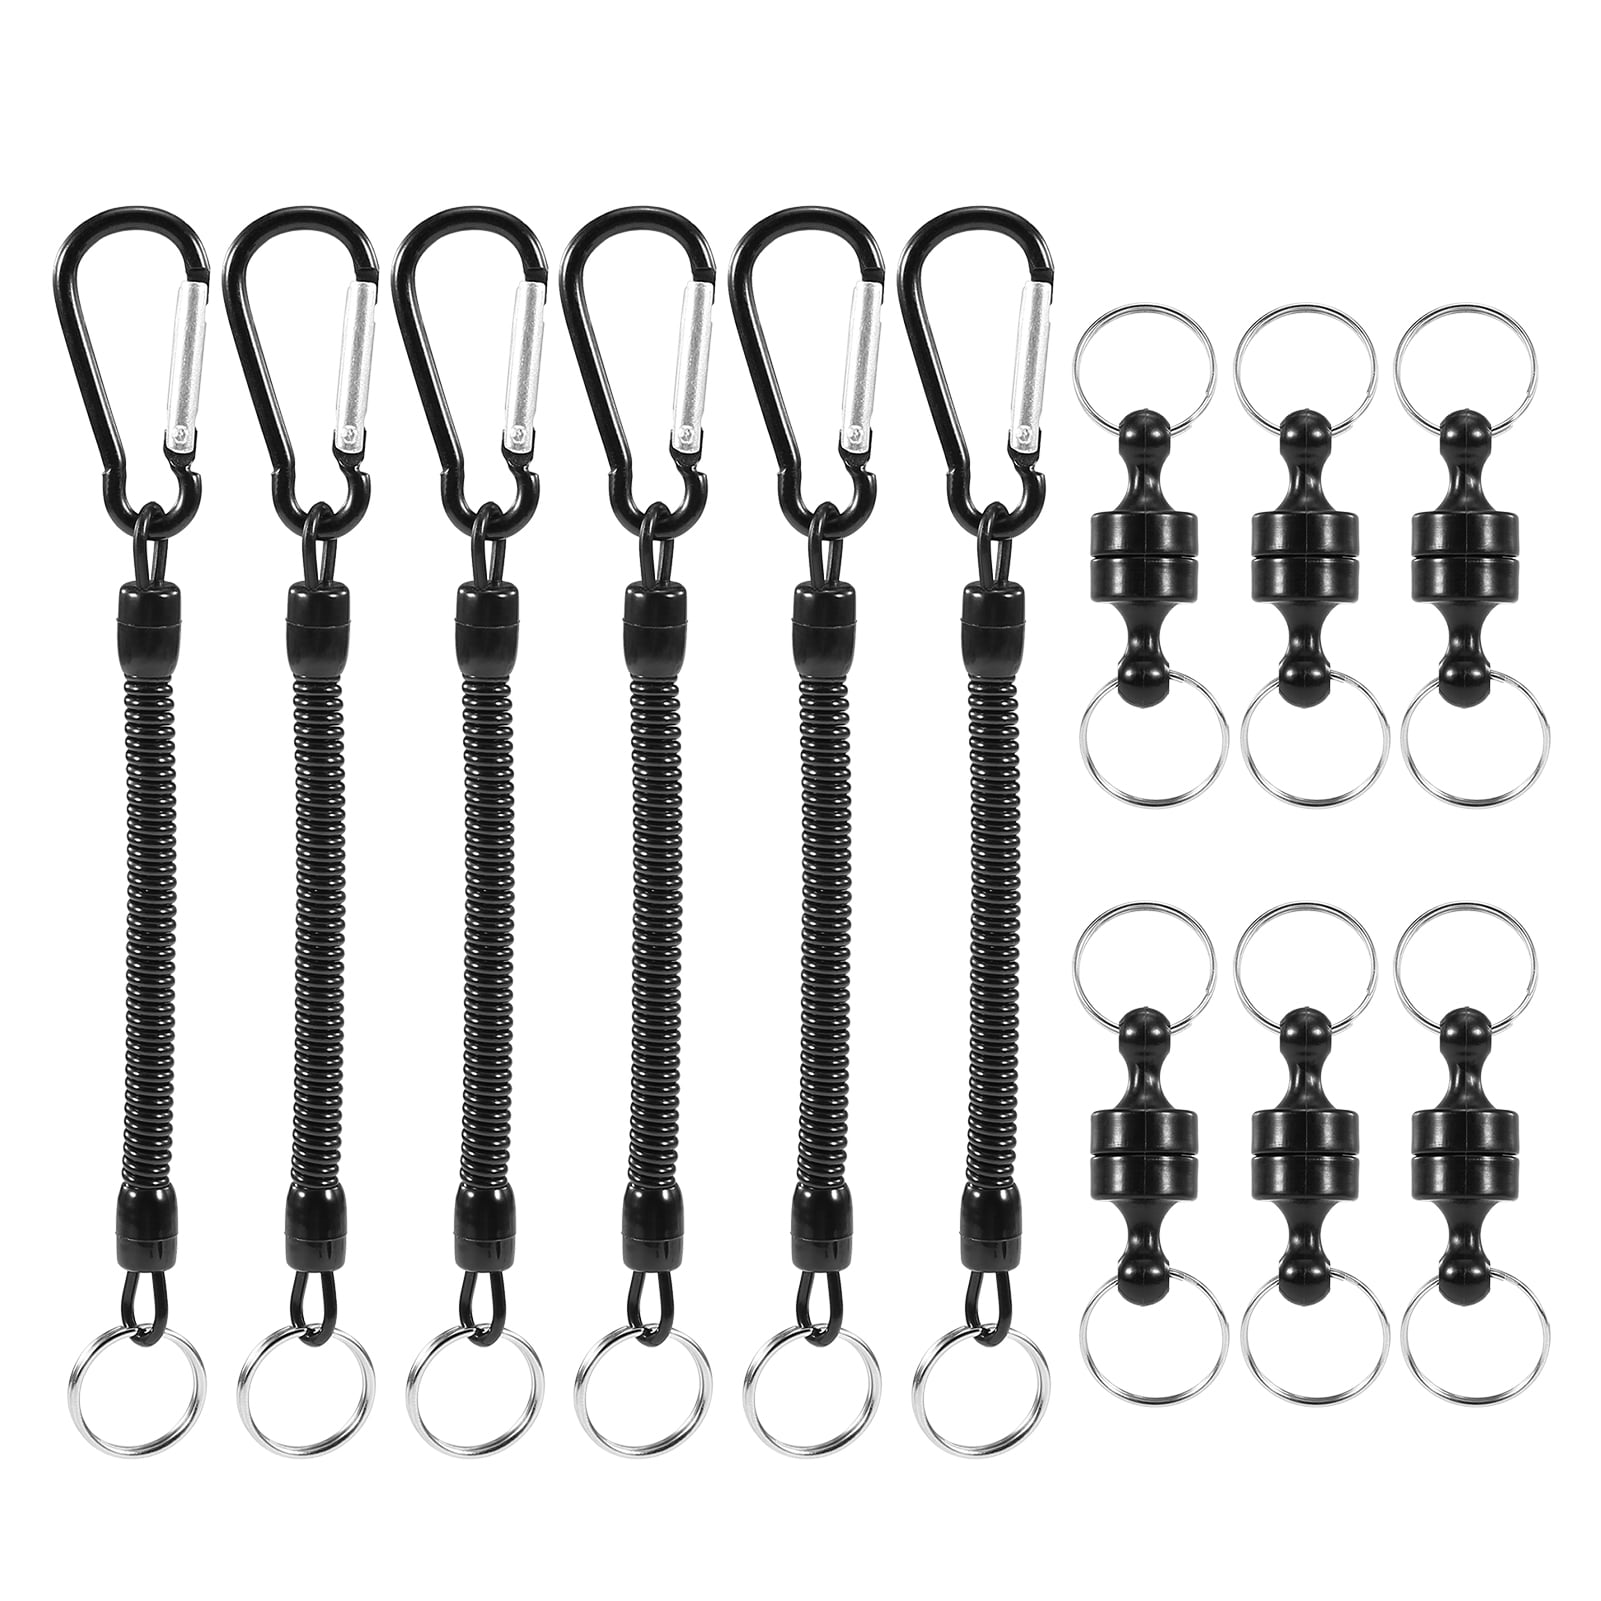 Lixada 6pcs Magnetic Release Holder with Coil Lanyard Carabiner Clip Magnetic  Net Release for Fly Fishing 